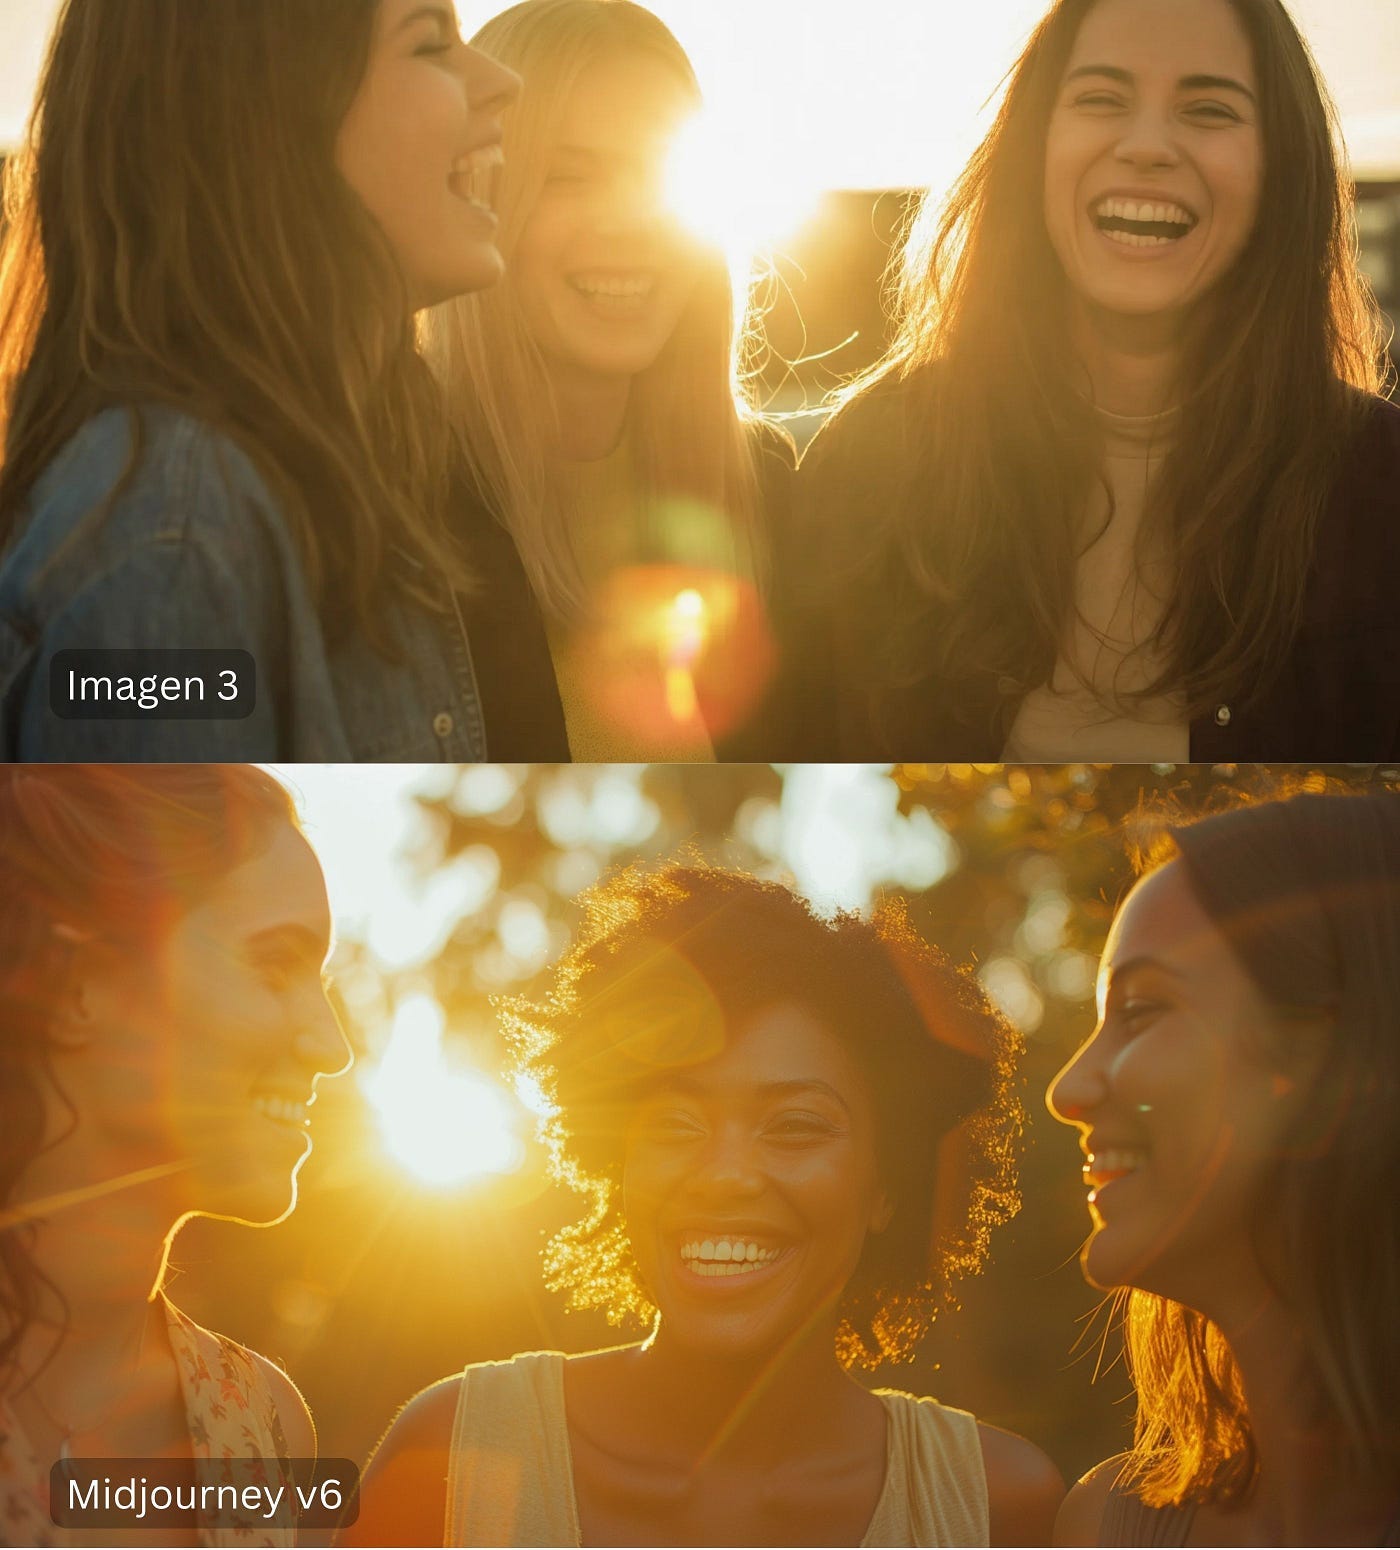 Three women stand together laughing, with one woman slightly out of focus in the foreground. The sun is setting behind the women, creating a lens flare and a warm glow that highlights their hair and creates a bokeh effect in the background. The photography style is candid and captures a genuine moment of connection and happiness between friends. The warm light of golden hour lends a nostalgic and intimate feel to the image